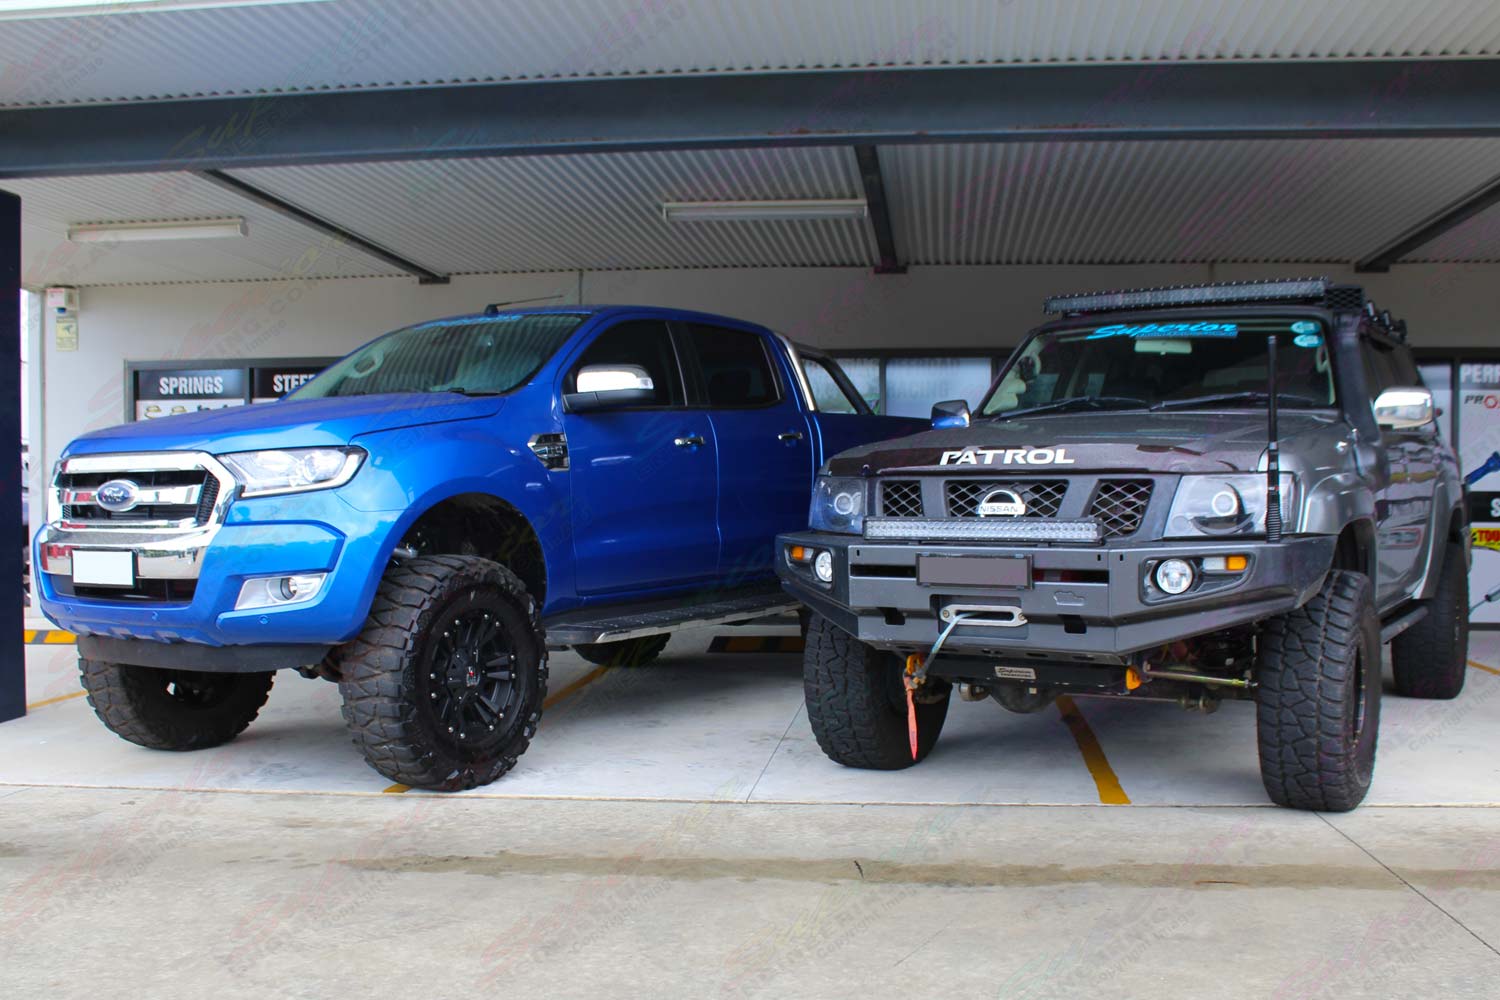 A 4 inch lifted Nissan Patrol next to the 5 inch lifted Ford Ranger at the ...